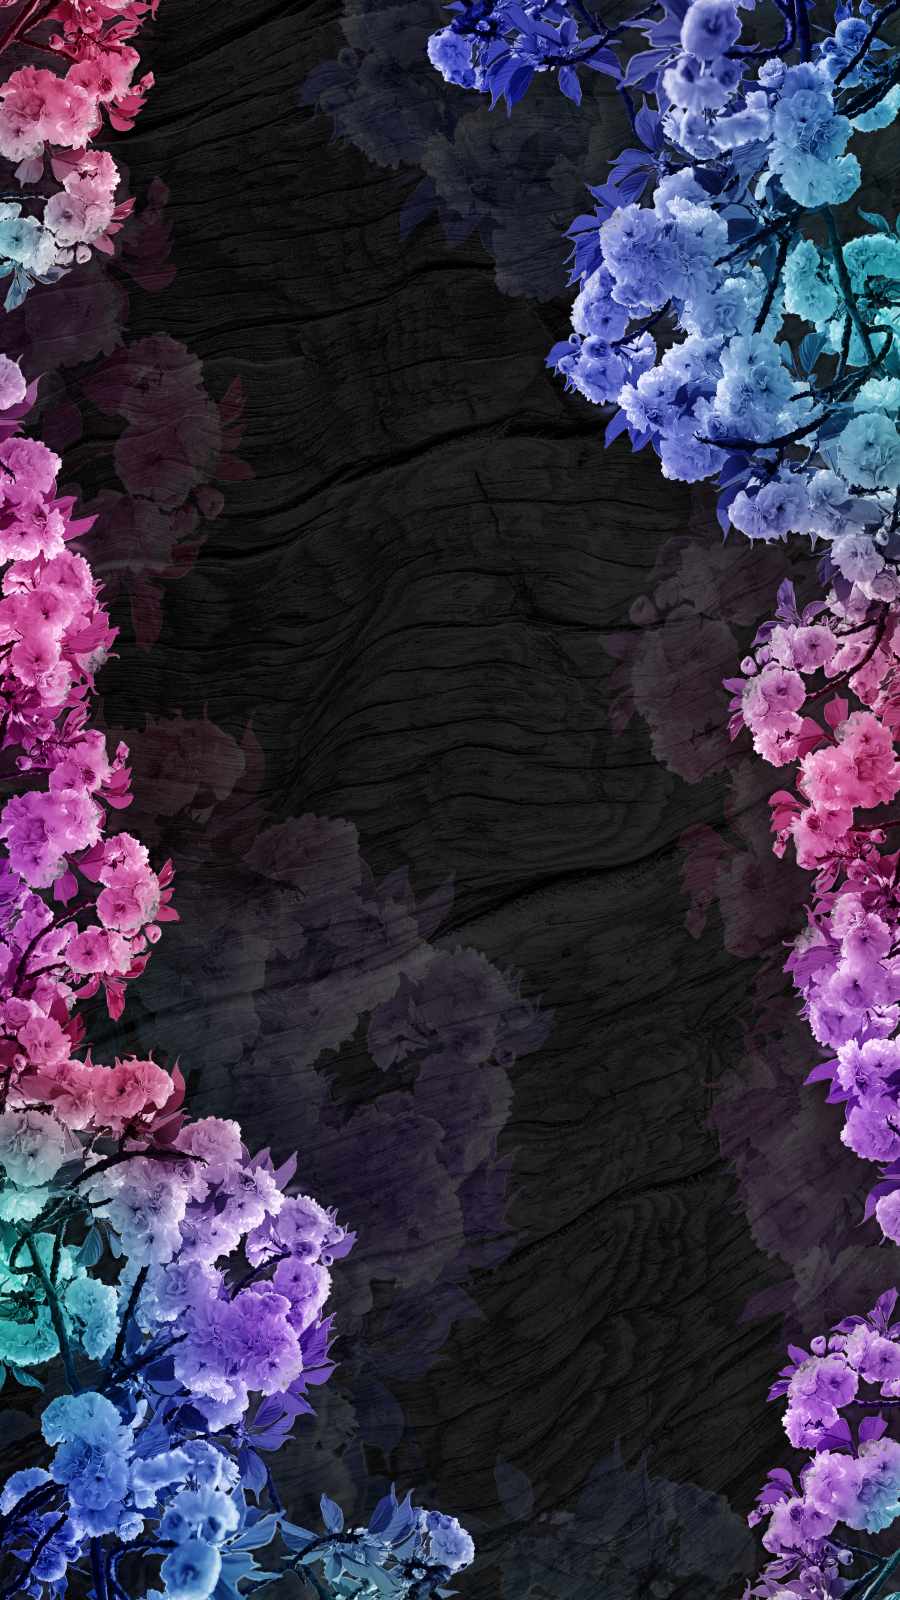 Flower Background IPhone Wallpaper - IPhone Wallpapers : iPhone Wallpapers